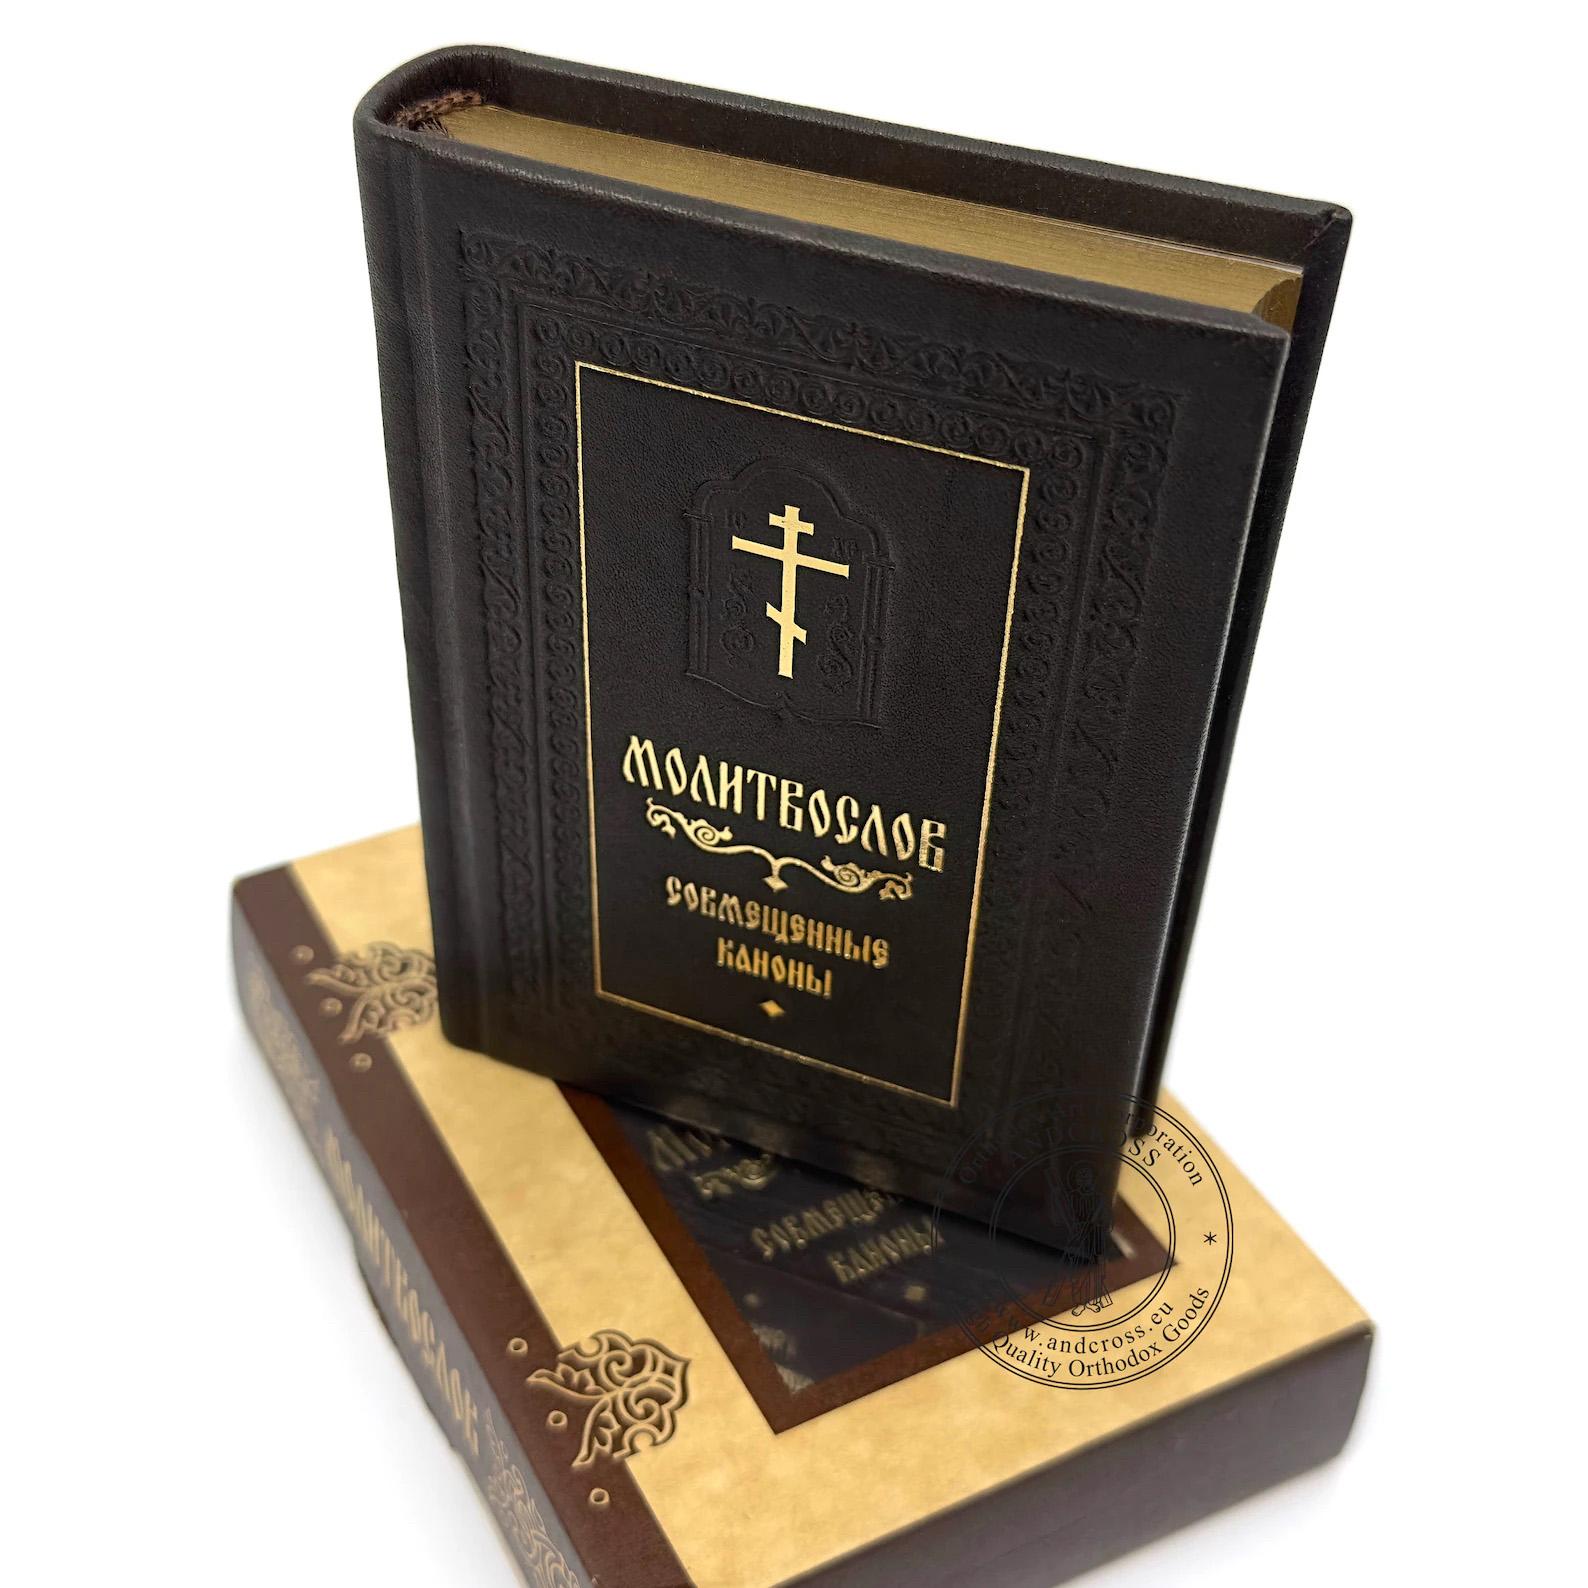 Orthodox Pocket Prayer Book and Canons